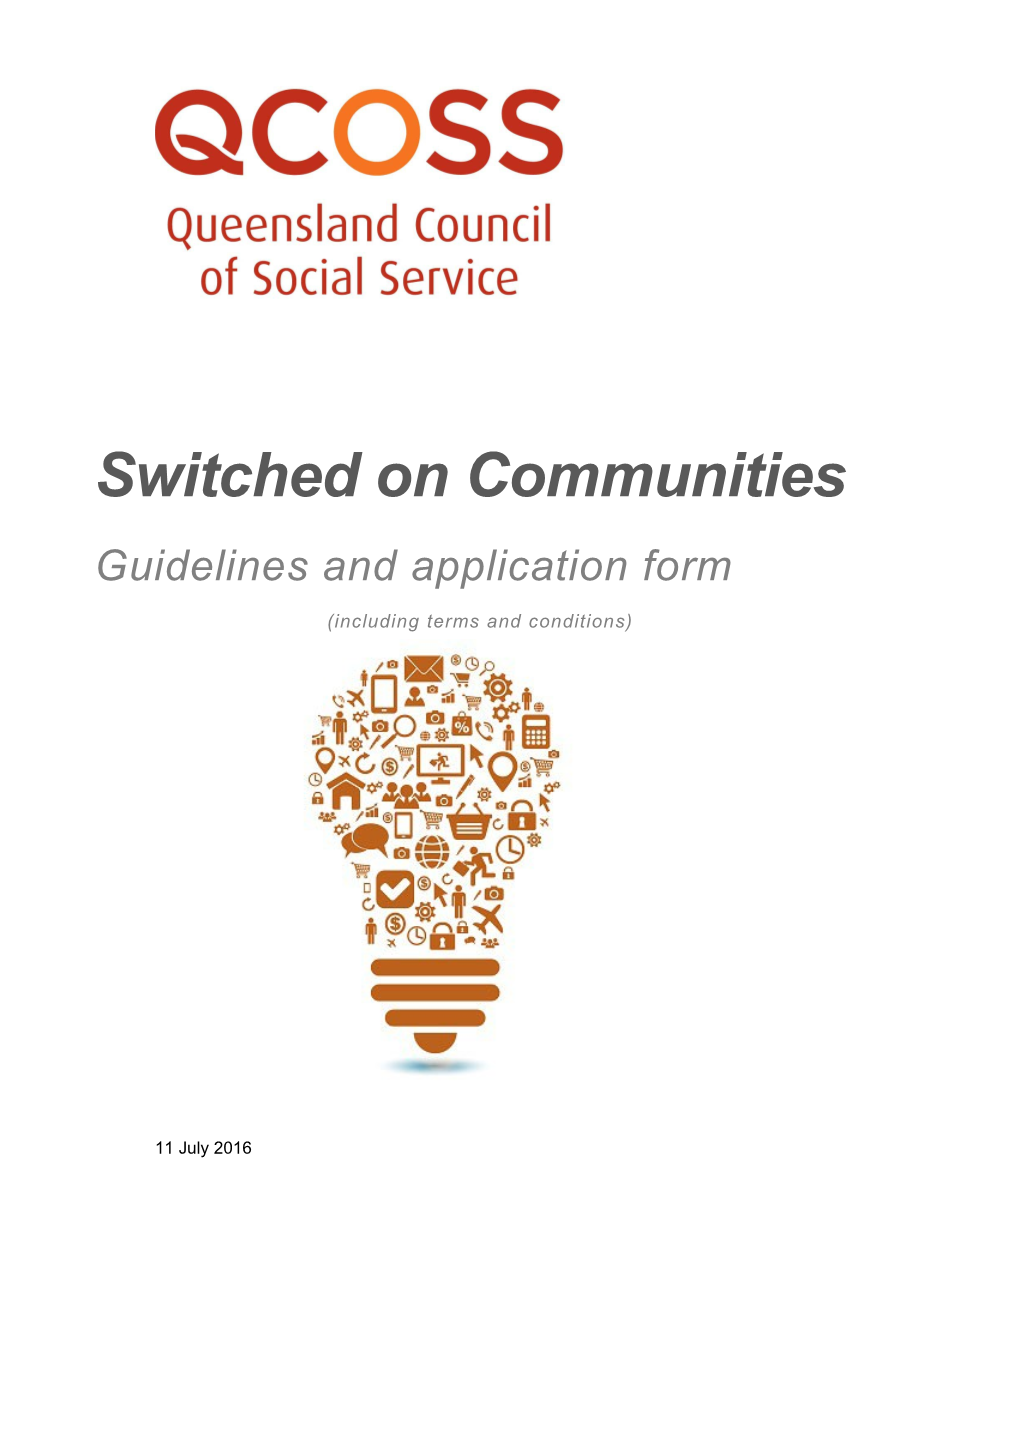 Switched on Communities Grant Application and Guidelines